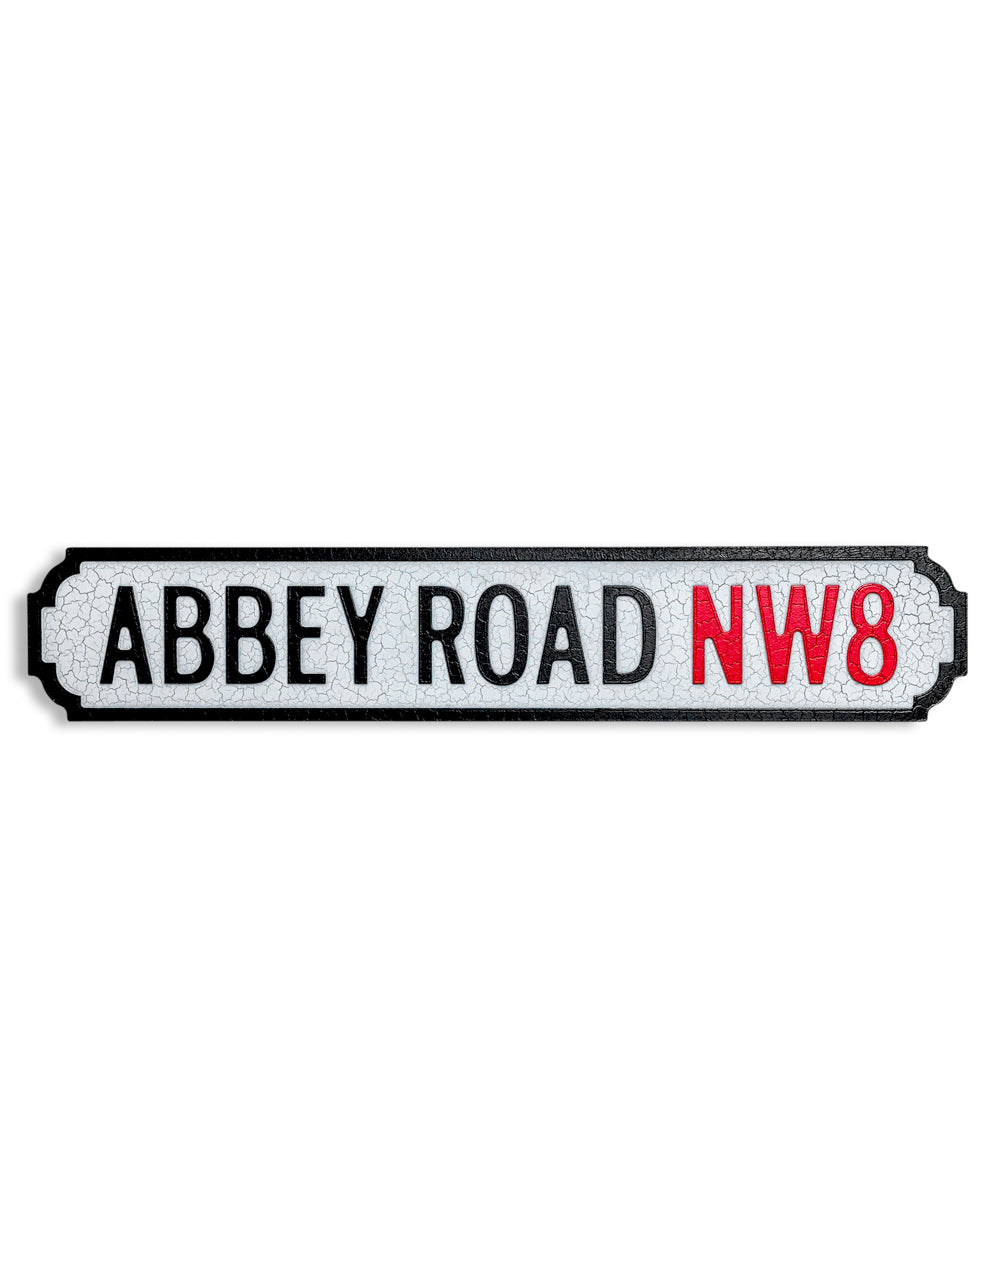 Antiqued Wooden "Abbey Road NW8" Road Sign